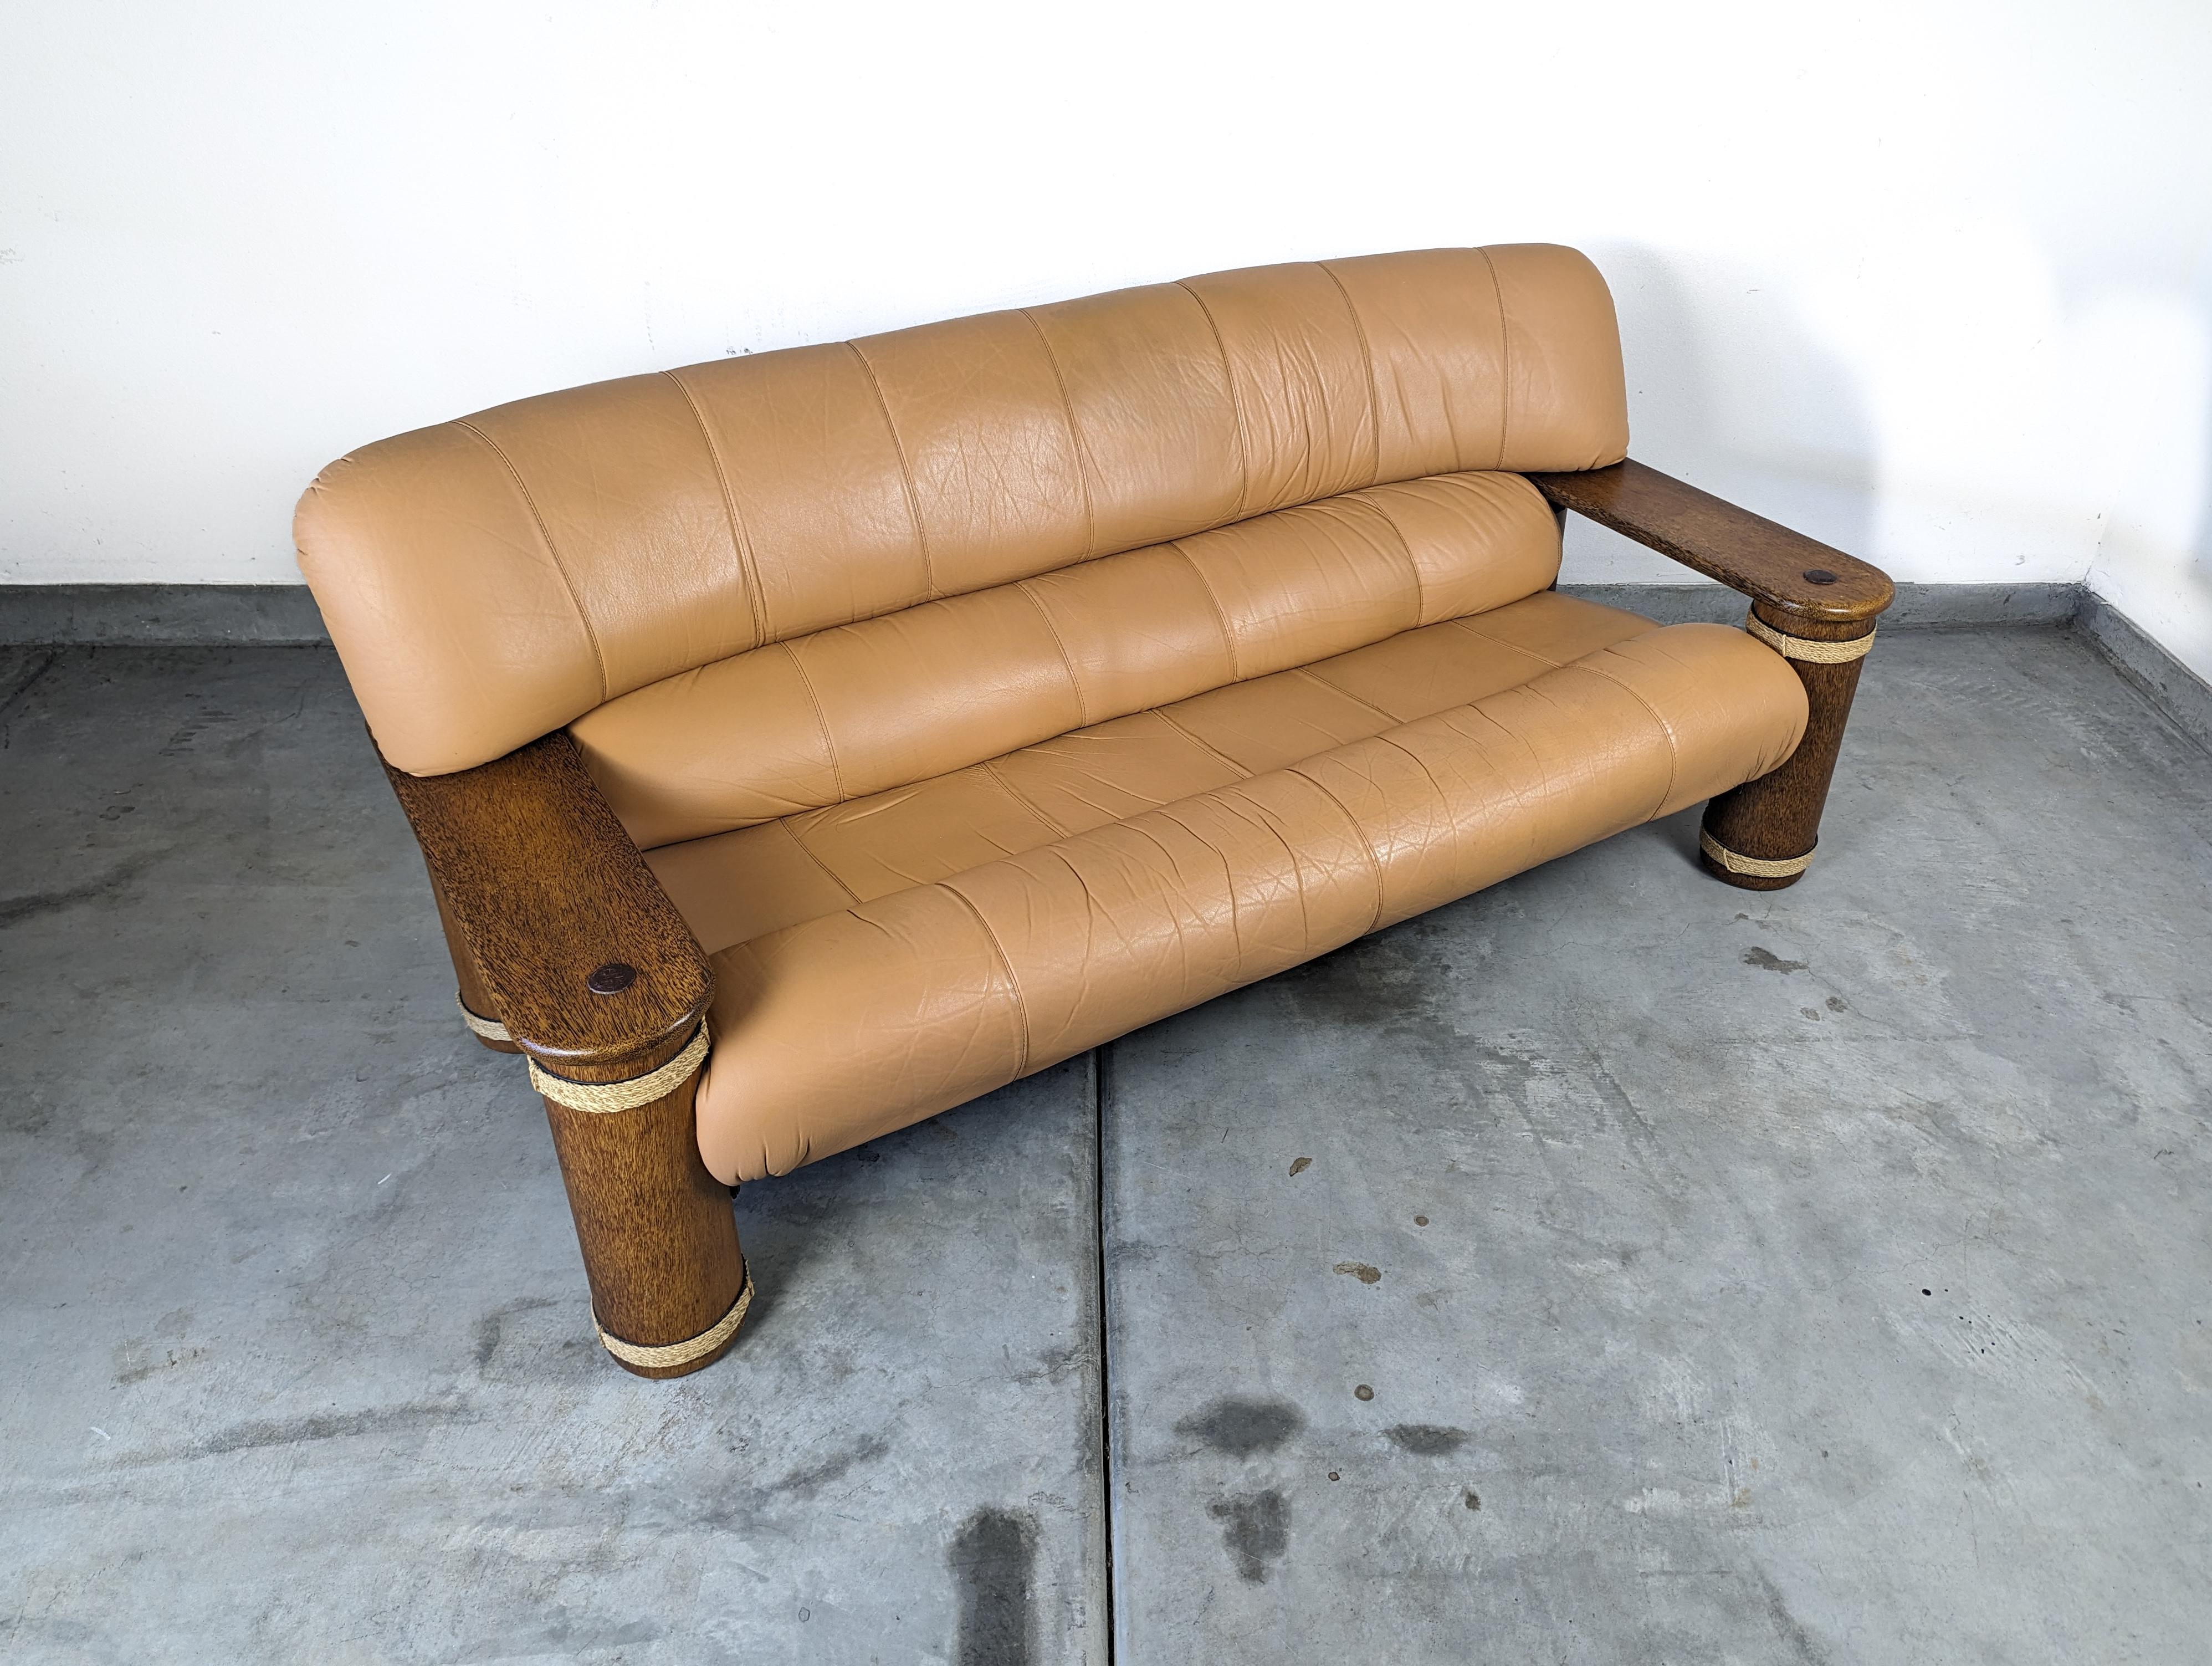 Vintage Leather and Palmwood Three-Seat Sofa by Pacific Green, c1990s For Sale 10